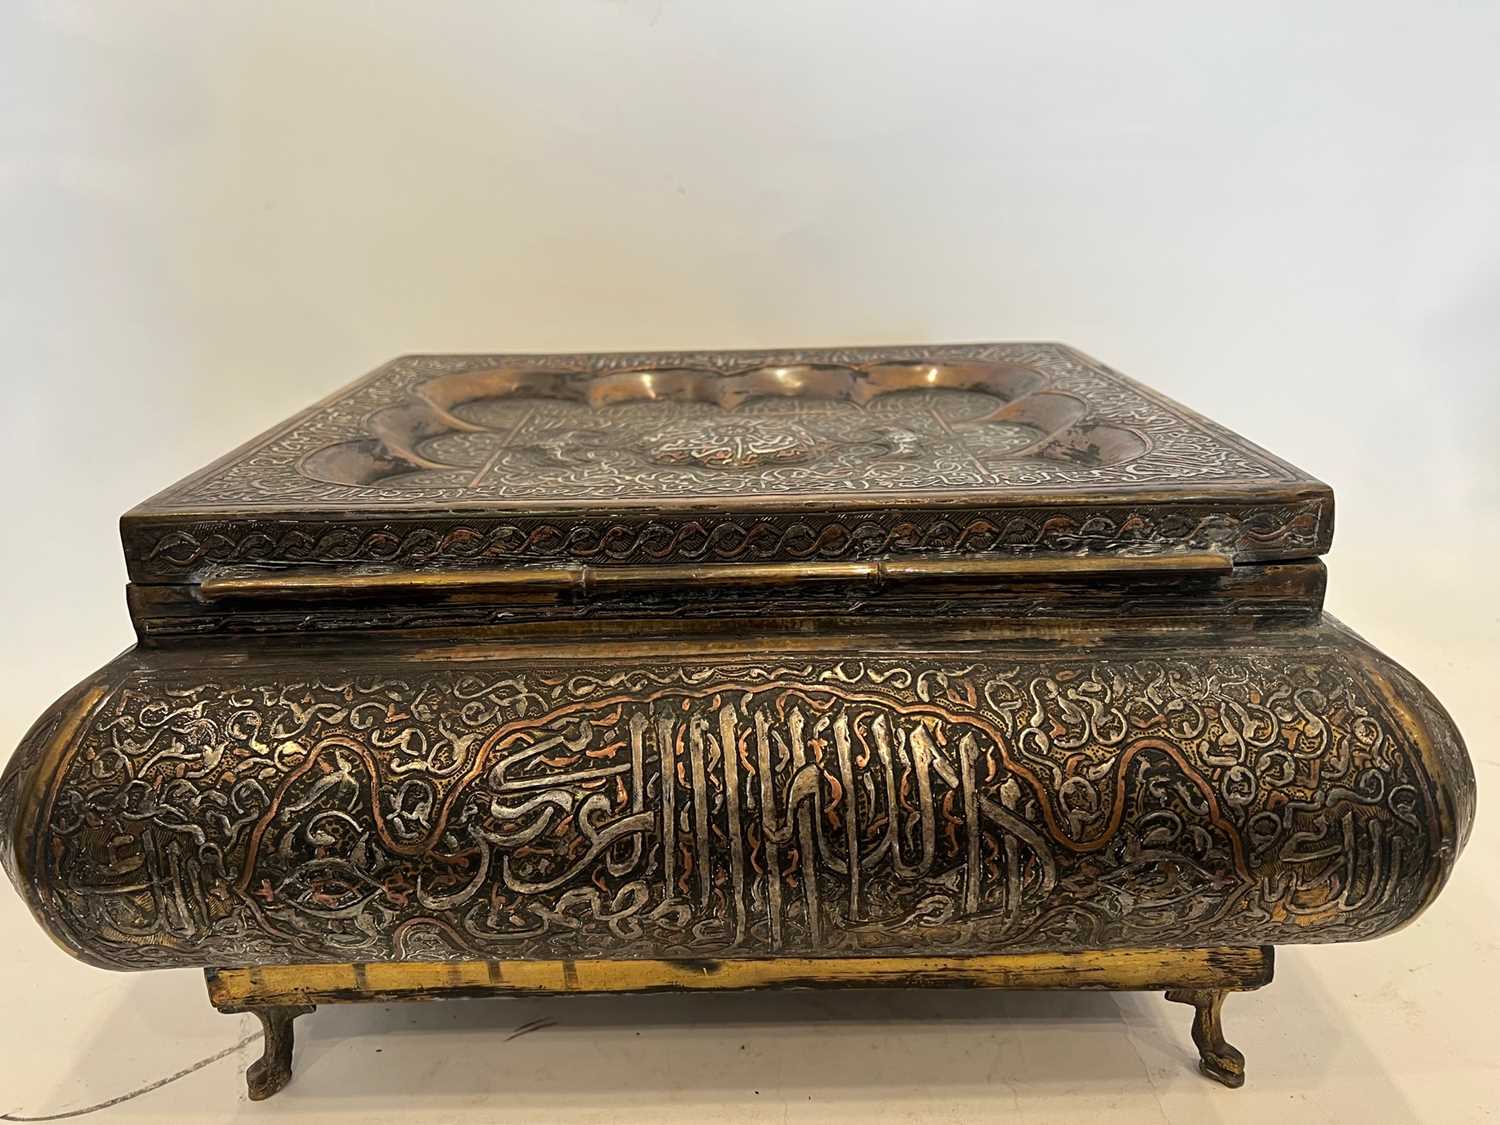 A LARGE EGYPTIAN MAMLUK REVIVAL SILVER AND COPPER INLAID BOX - Image 5 of 6